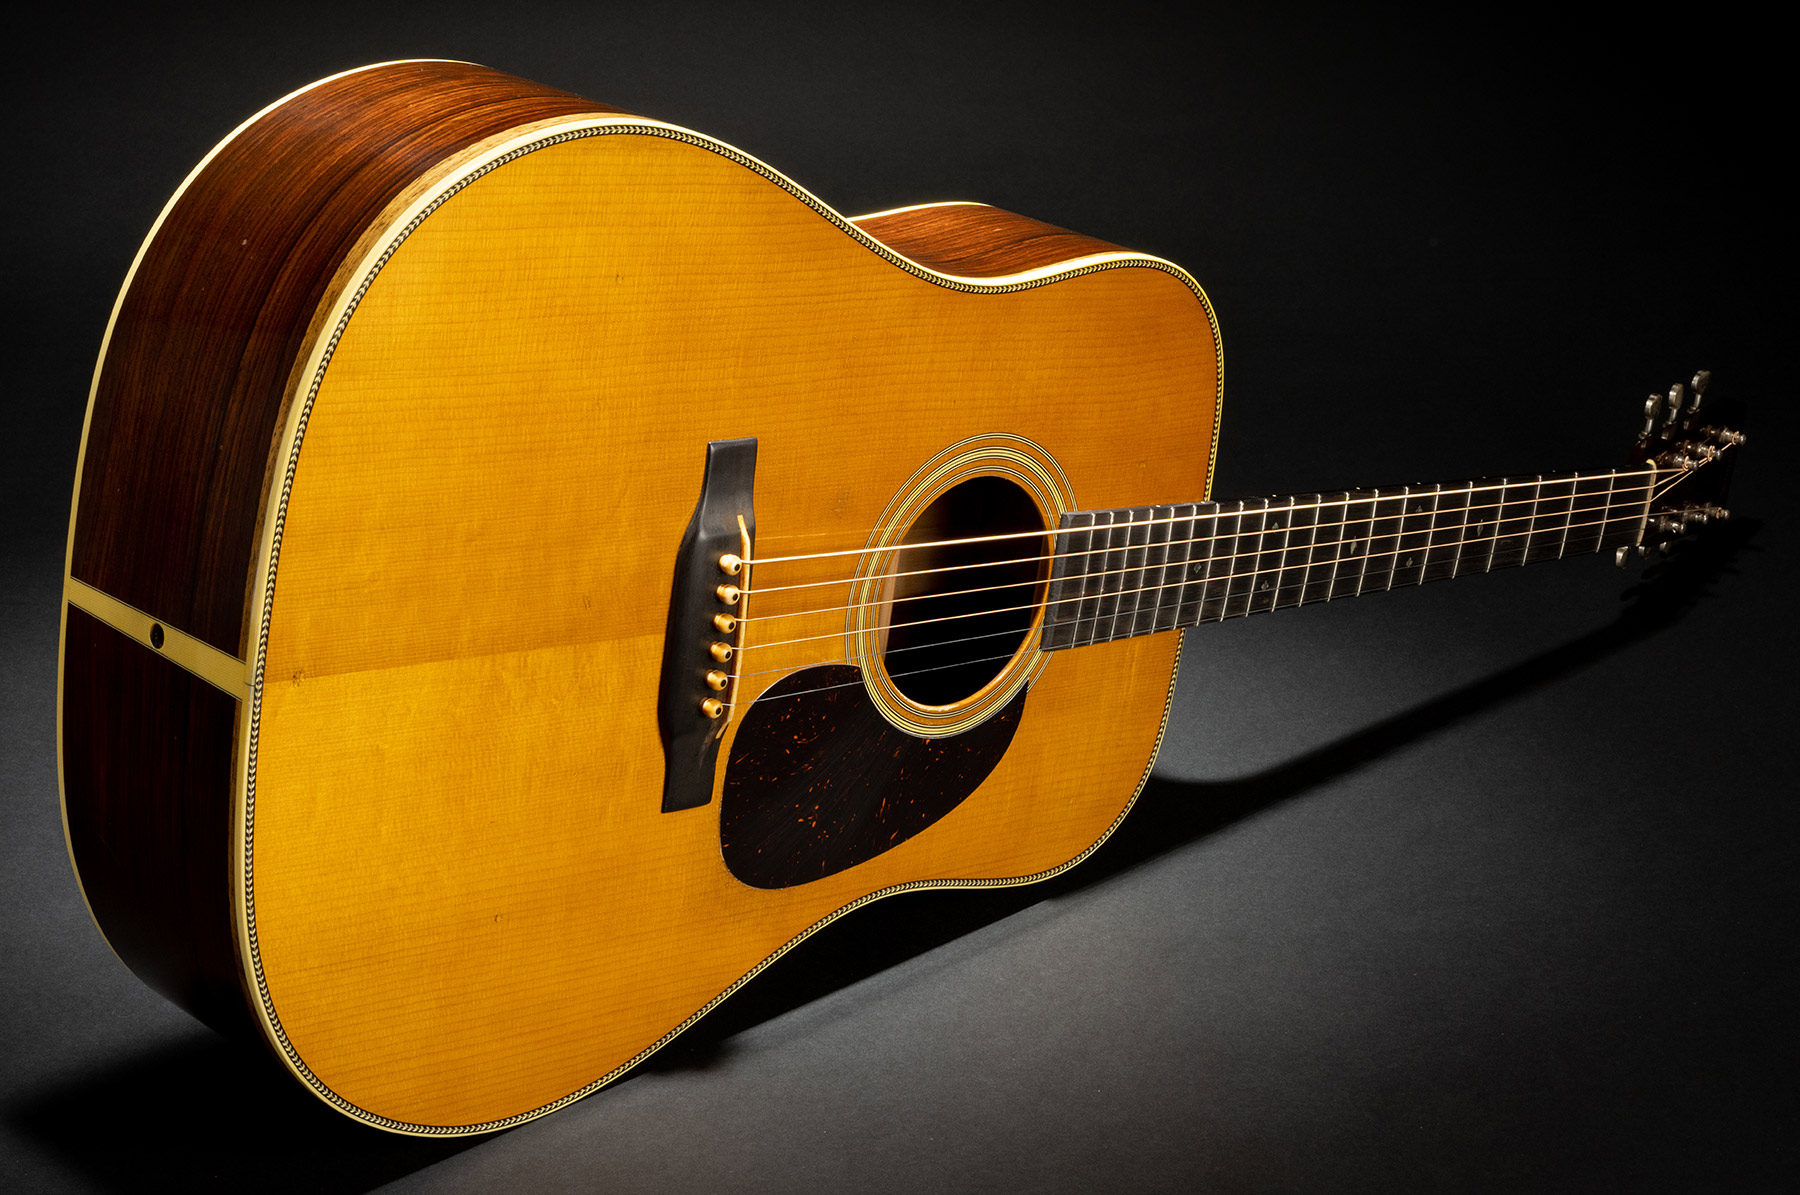 Martin D-28 Authentic 1937 Dreadnought Epicea Palissandre Eb - Aged Natural Vintage Gloss - Westerngitarre & electro - Variation 3